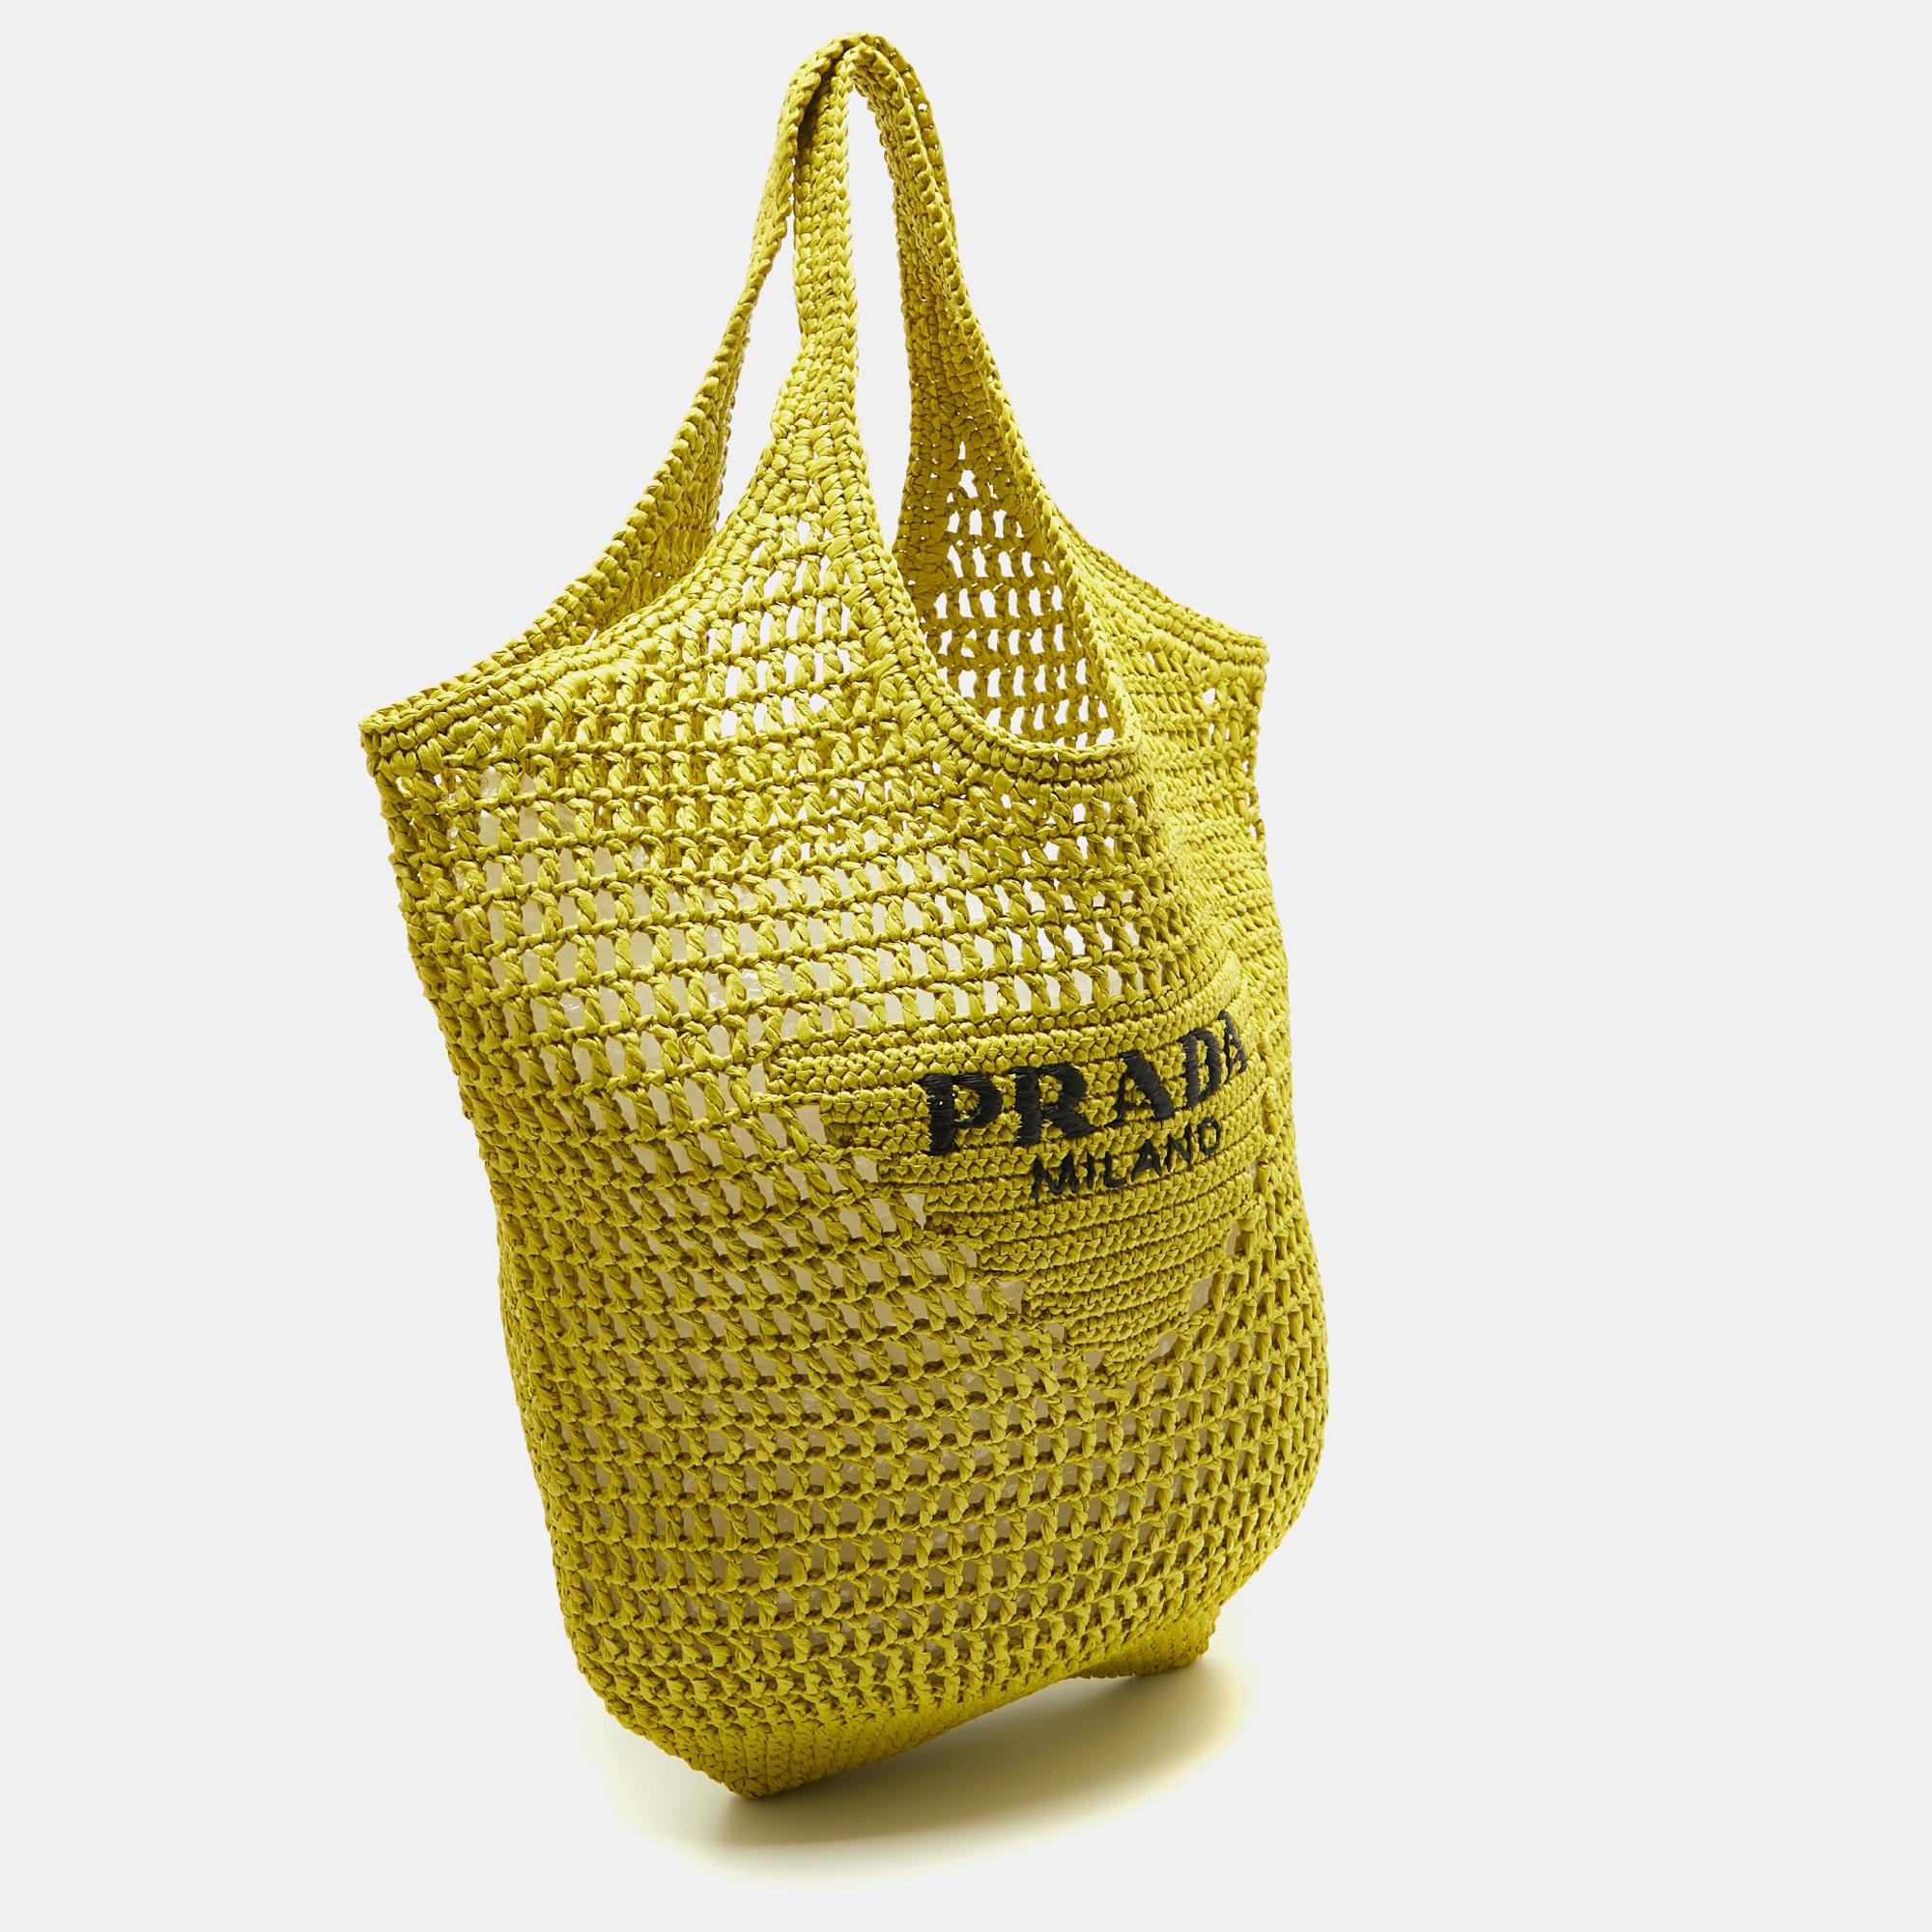 The Prada tote exudes effortless elegance with its sunny hue and intricate crochet detailing. Crafted from high-quality straw, it boasts a spacious interior perfect for carrying your essentials in style. This versatile accessory effortlessly